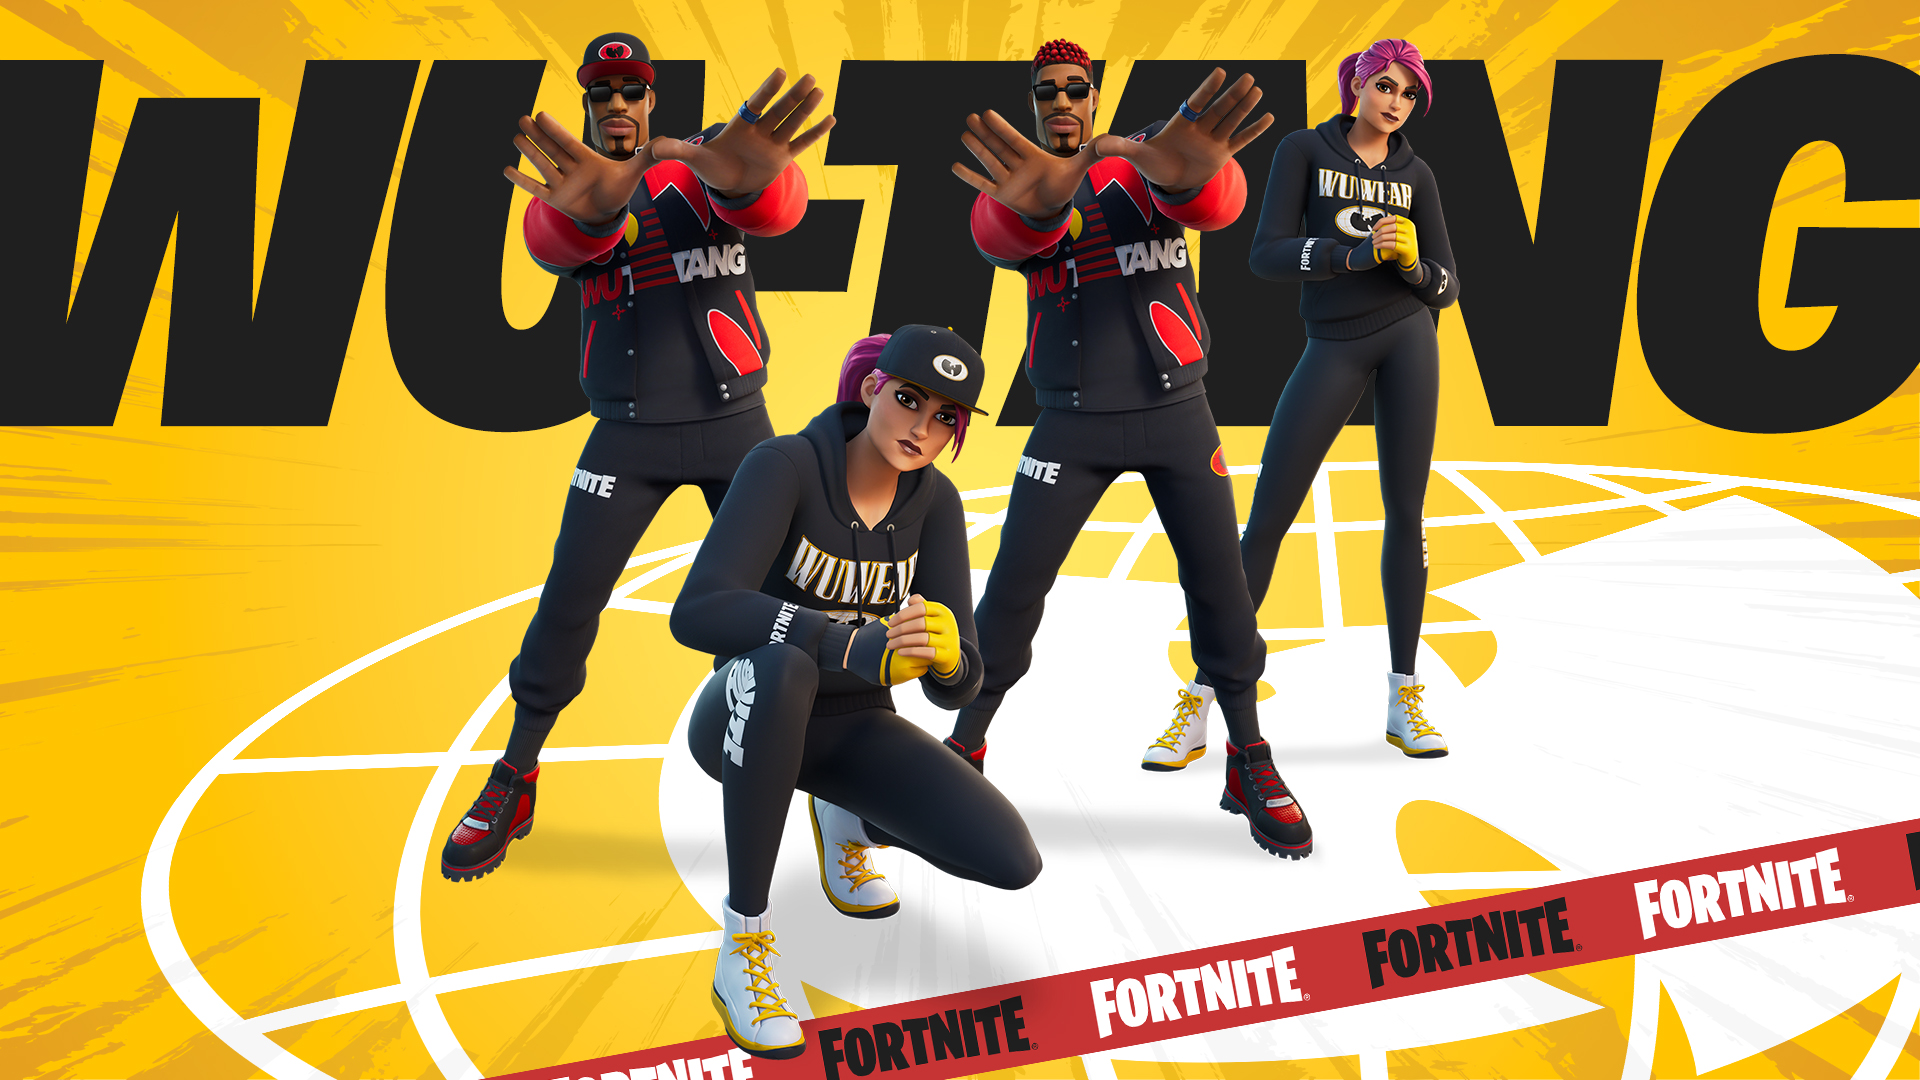 Wu-Tang Clan Brings A Style Revolution To Fortnite